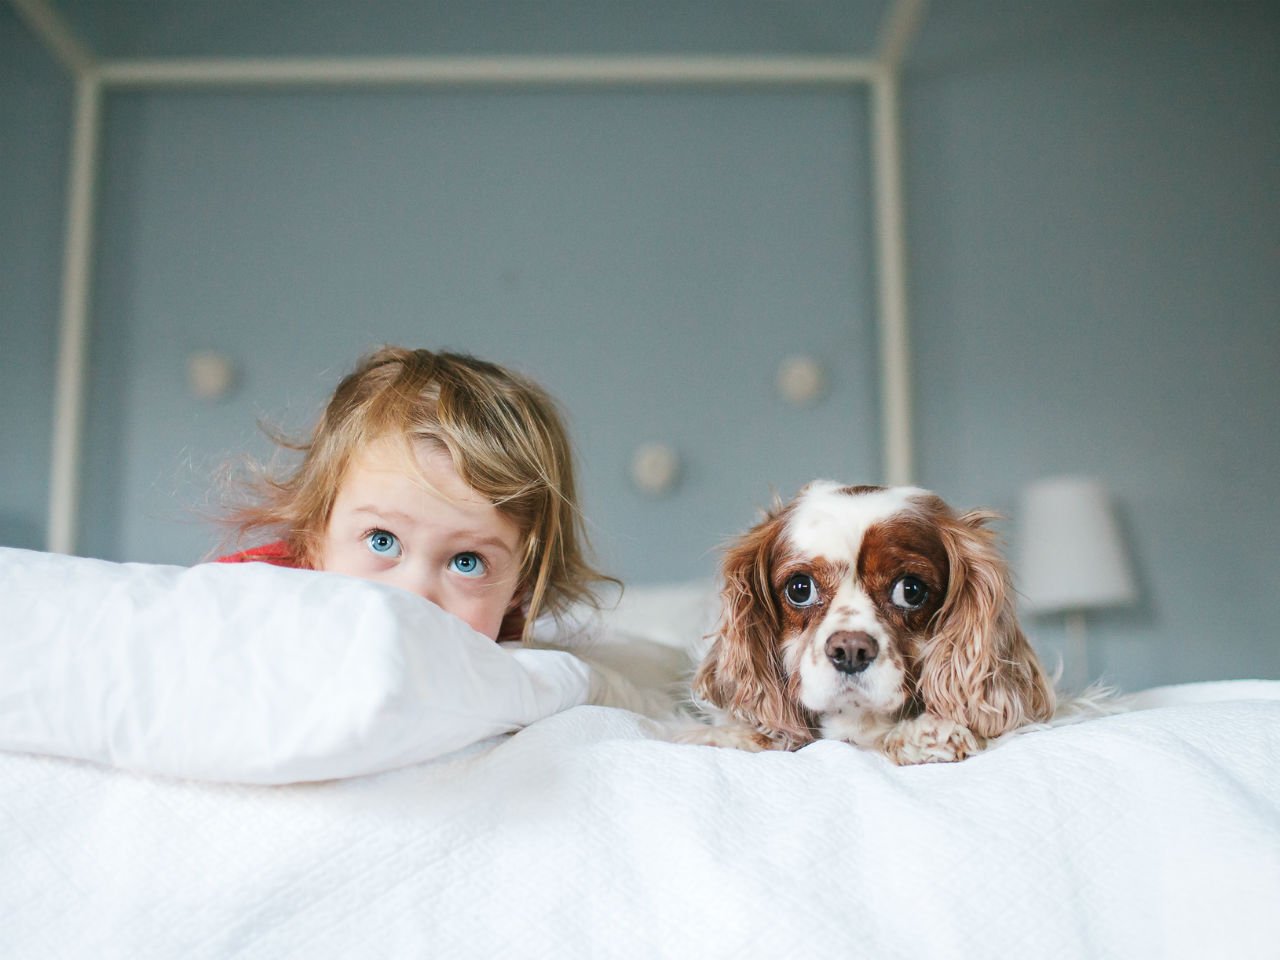 a little child and their dog hiding together on a bed 